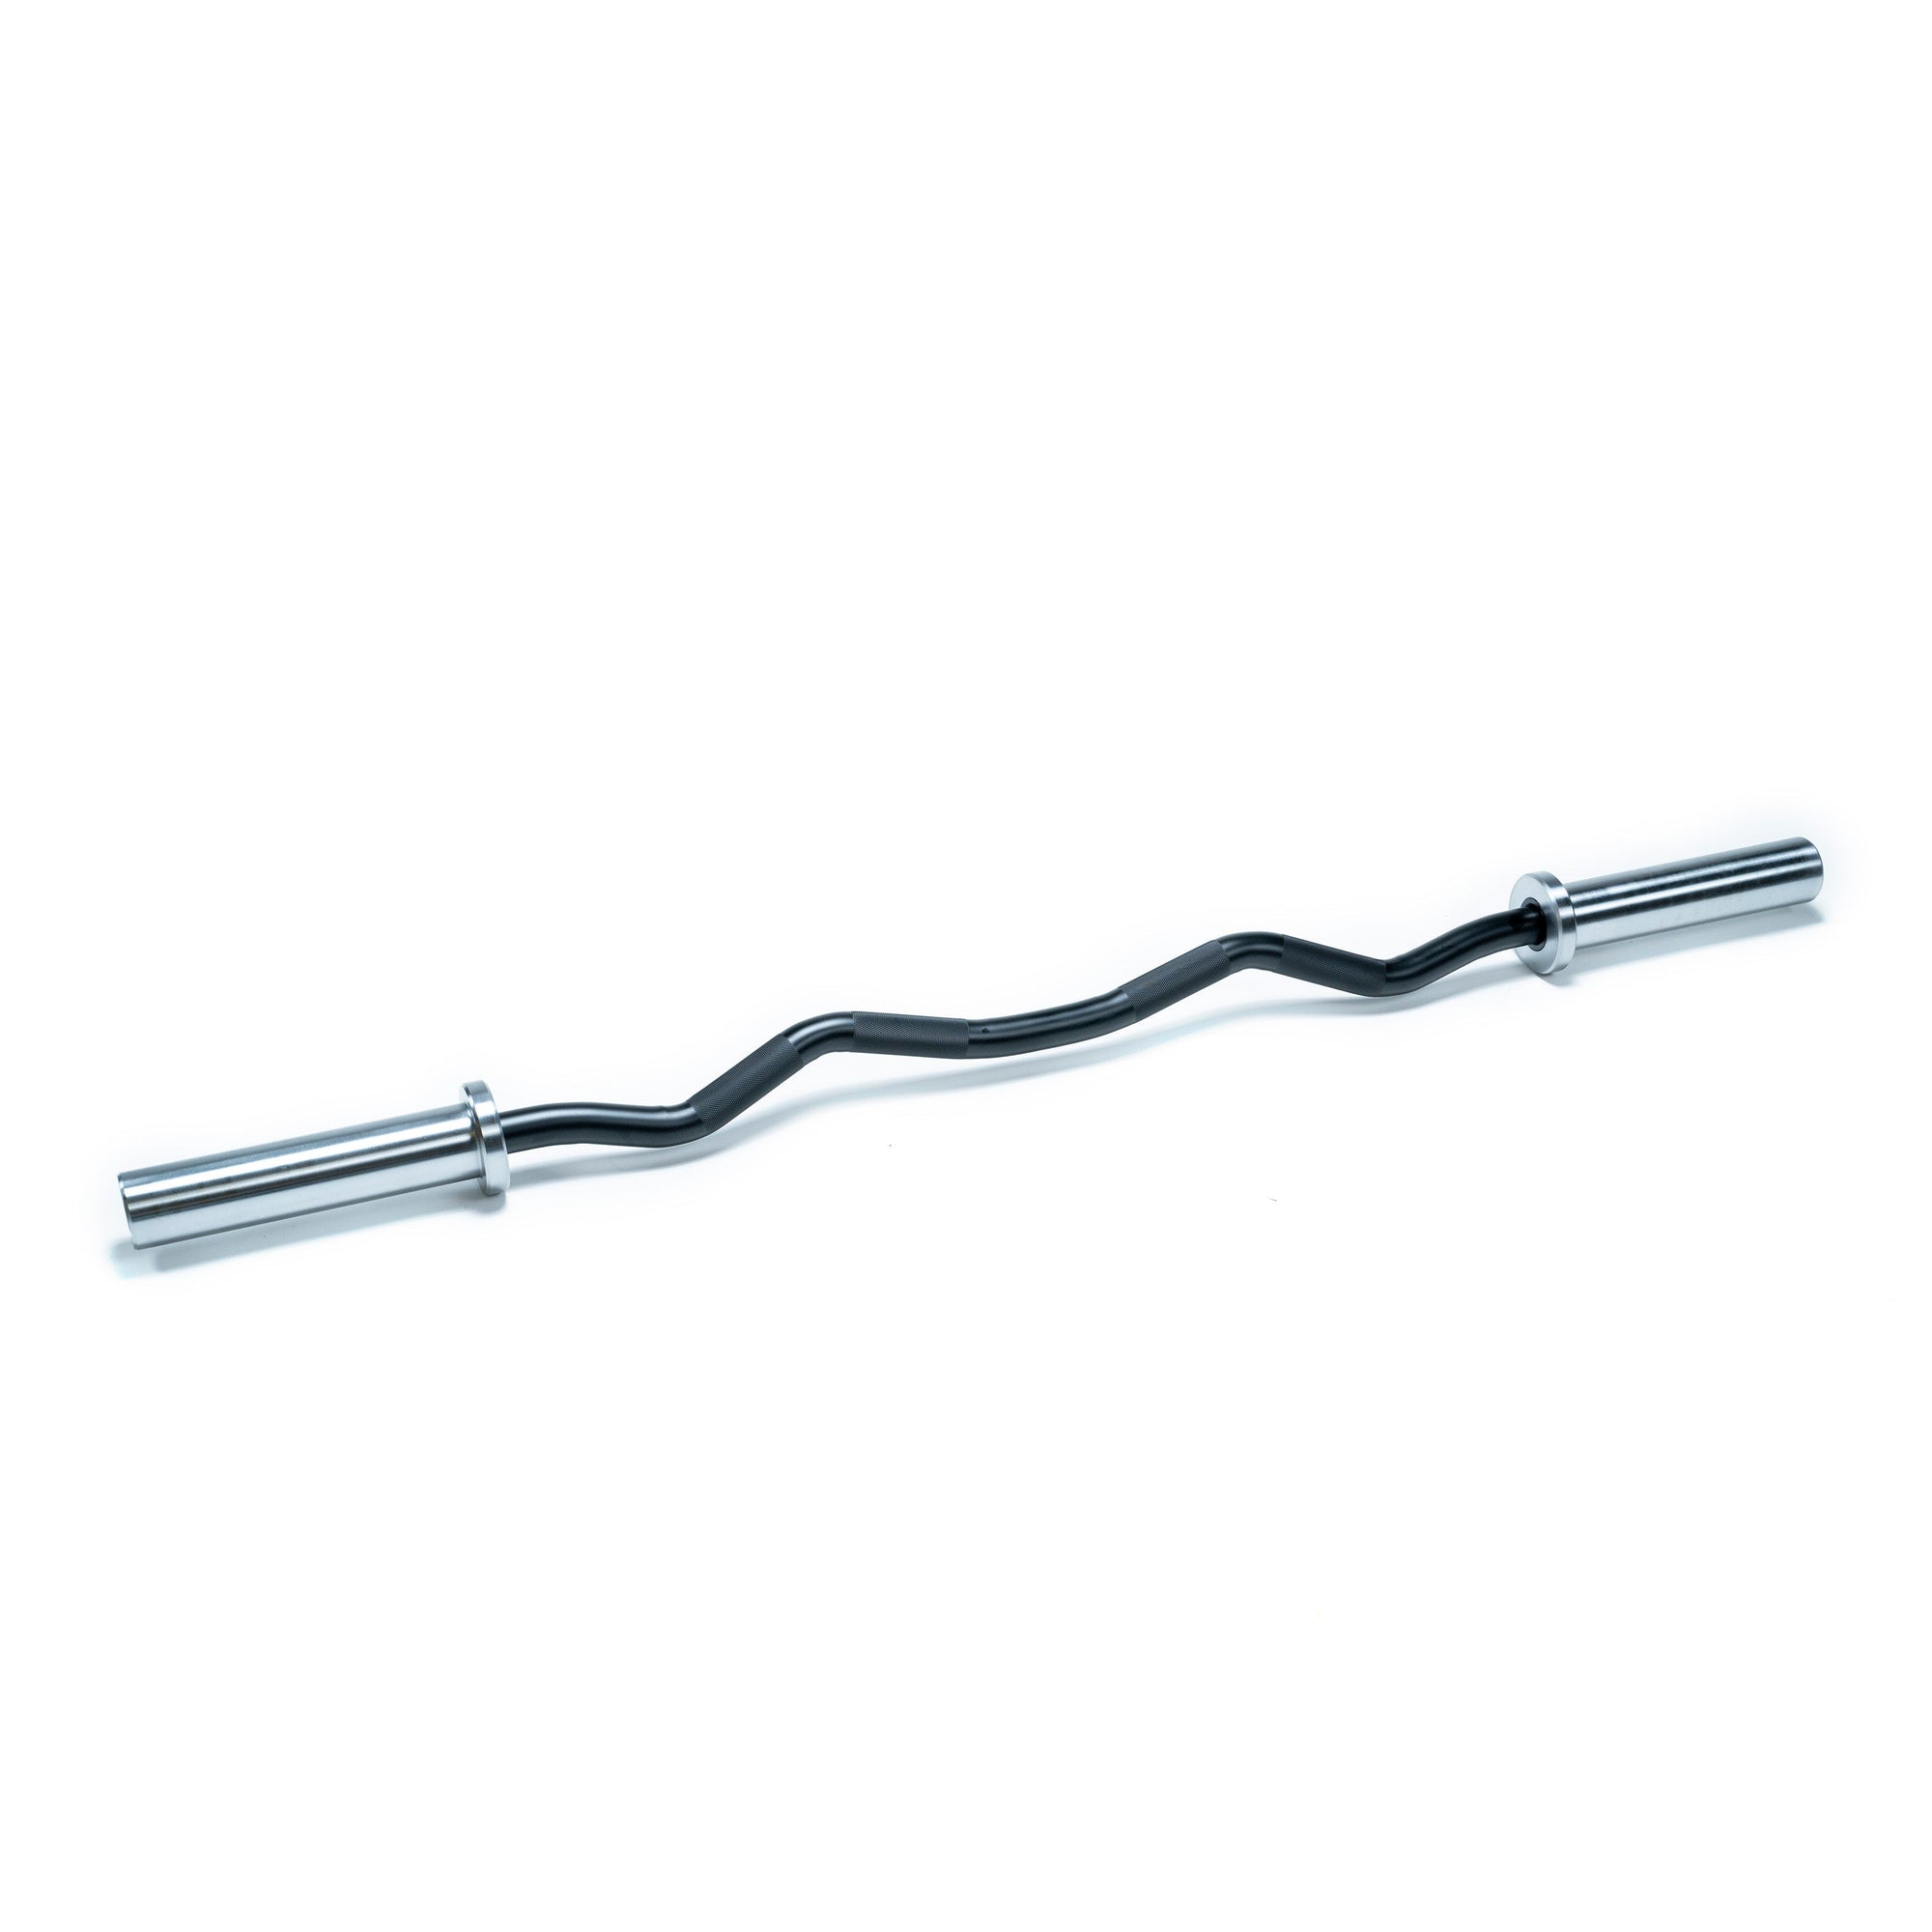 FitWay Equip. Premium Olympic Curl Bar 